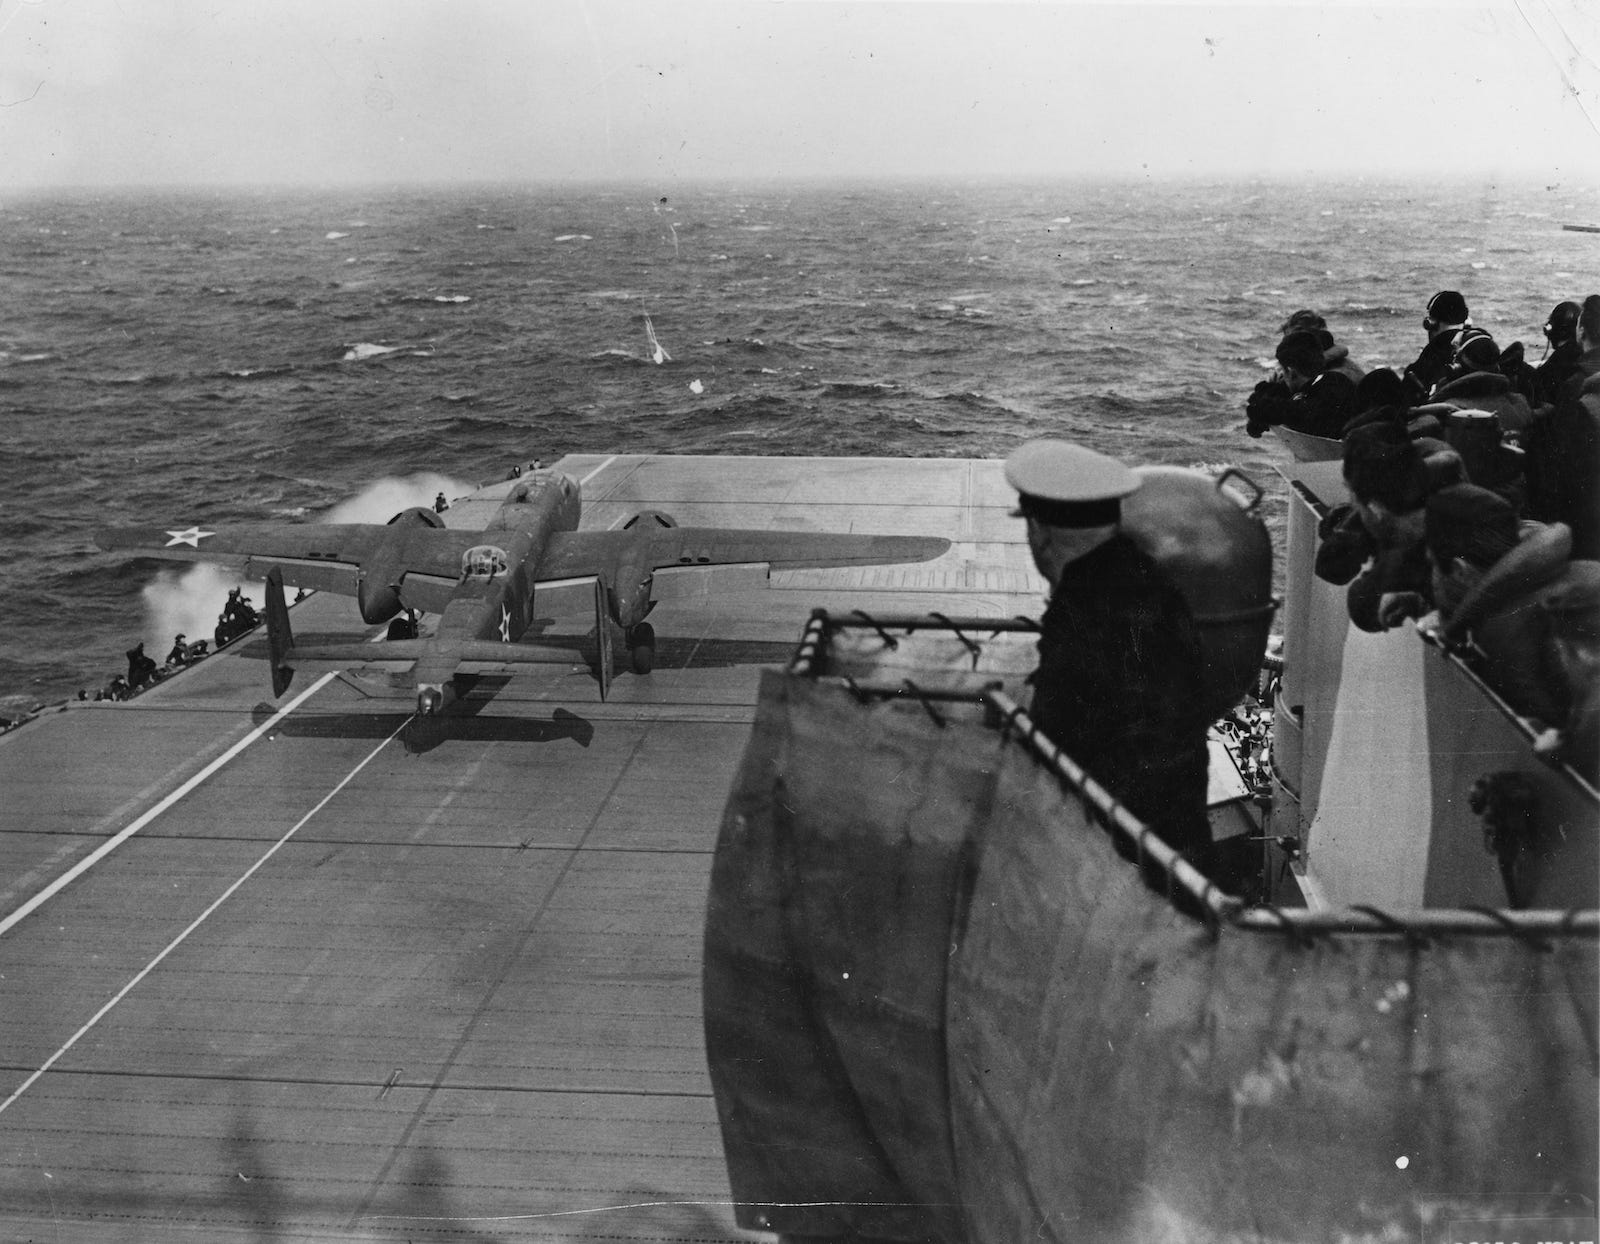 USS HORNET, PACIFIC OCEAN 1942 -- Lt. Col. James "Jimmy" Doolittle performs a full-throttle takeoff from the USS Hornet 650 miles from Japan on a secret mission. The Doolittle Raid, U.S. Army Air Force special order No. 1 of World War II, was a daring one-way mission of 16 B-25 Mitchell medium bombers with 80 aircrew, commanded by Colonel Doolittle, to carry out America’s first offensive attack on Japan. The crews secretly trained for two-weeks and modified the B-25s at Eglin Air Force Base's Wagner Field, Auxiliary Field 1 prior to the mission.